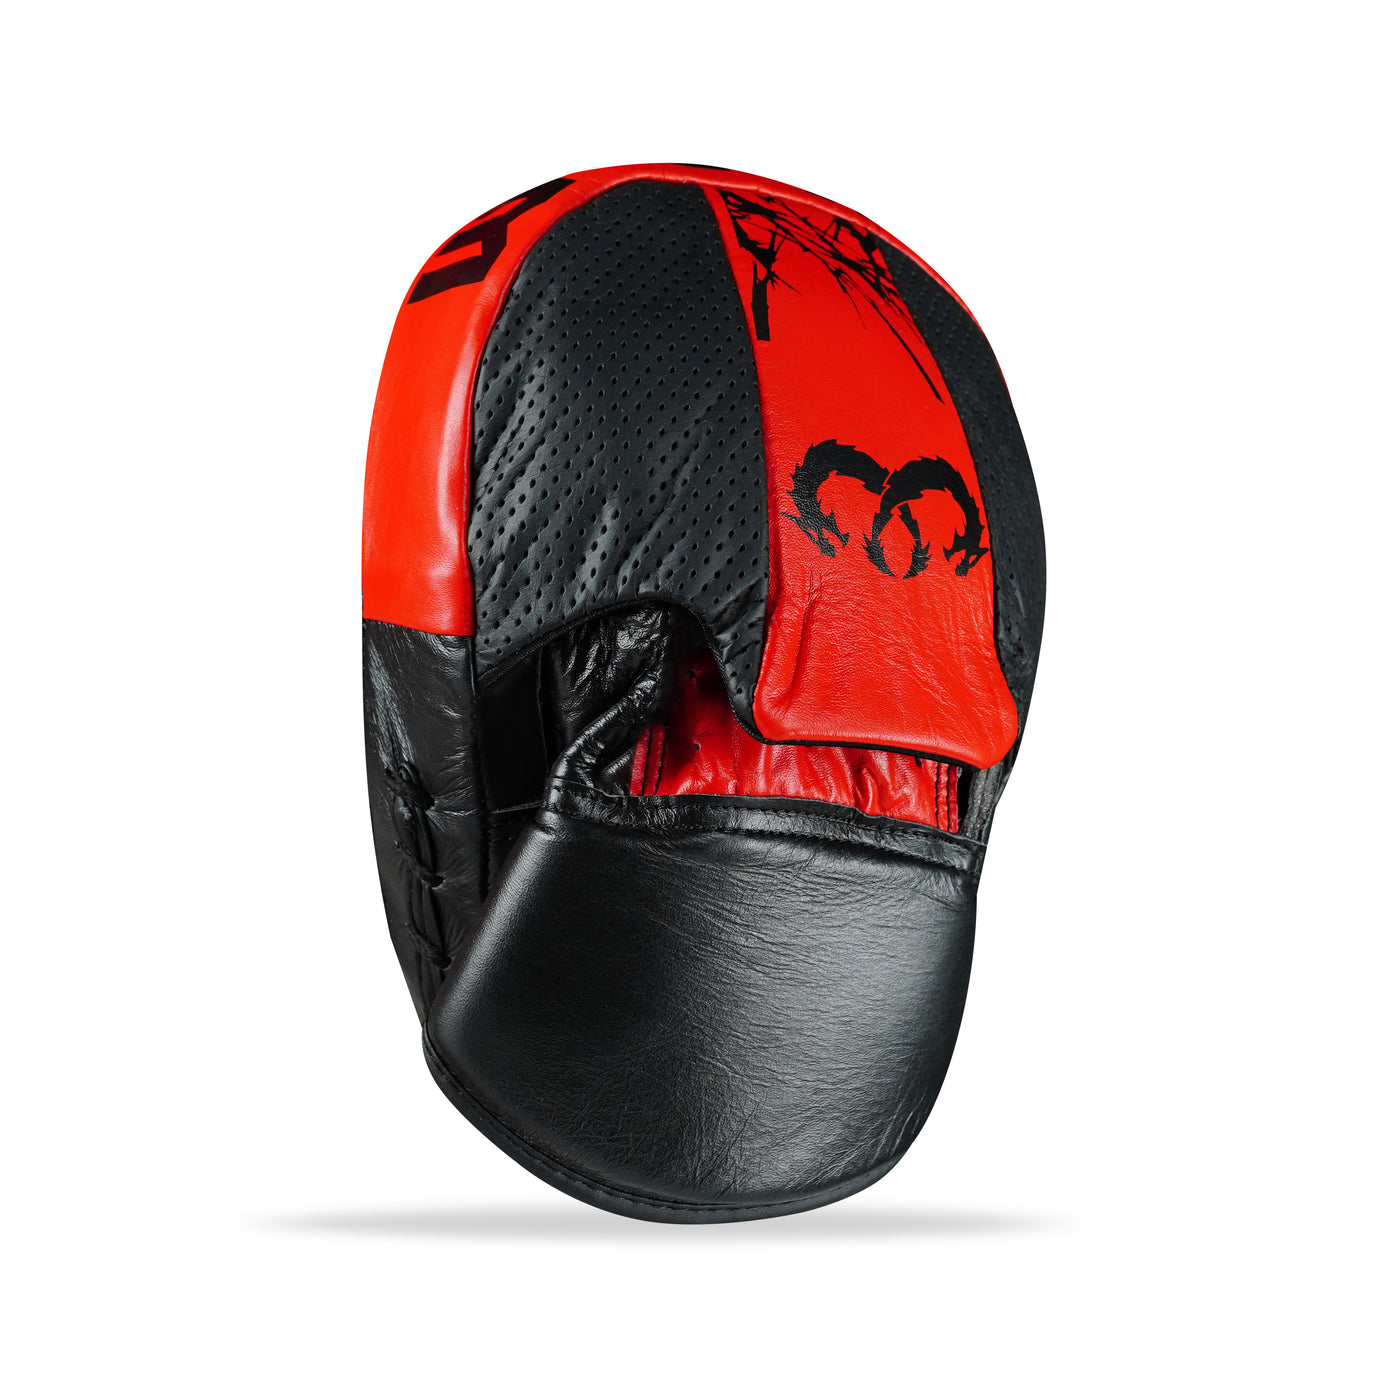 Skull Red Genuine Leather Focus Pads